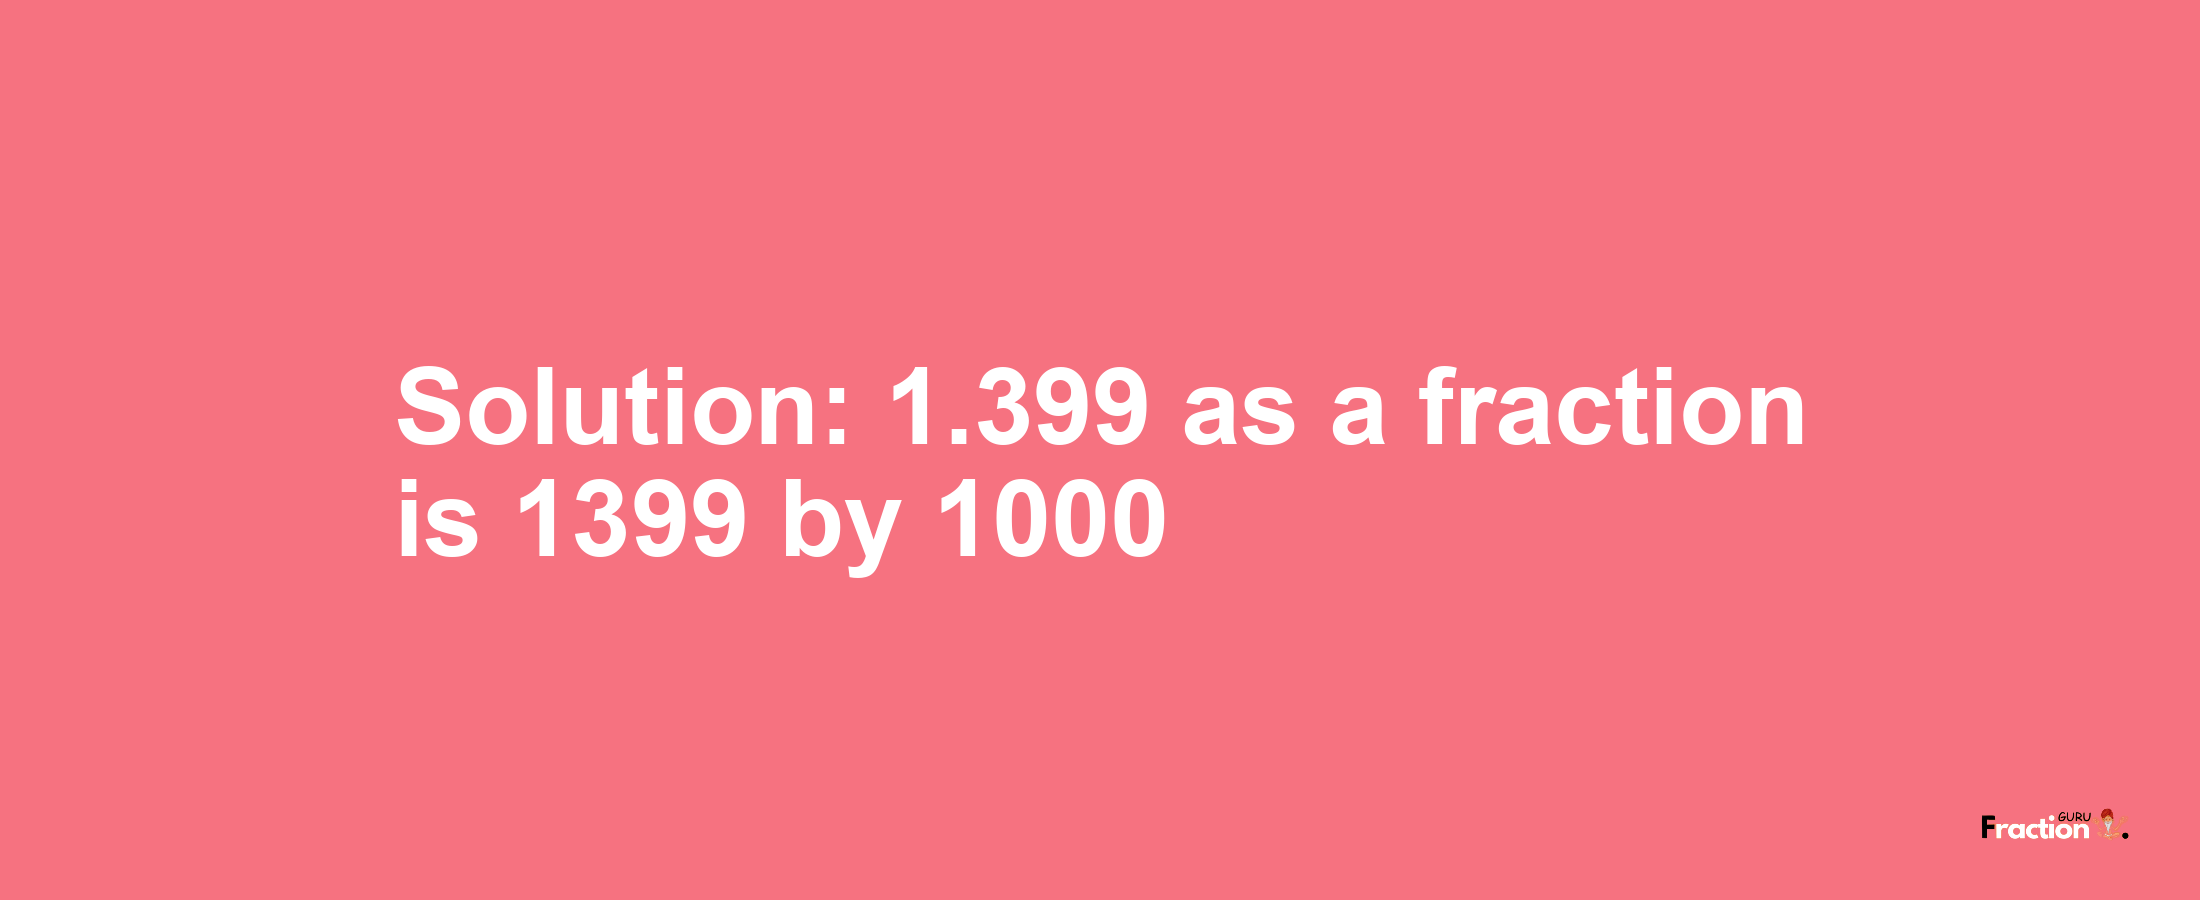 Solution:1.399 as a fraction is 1399/1000